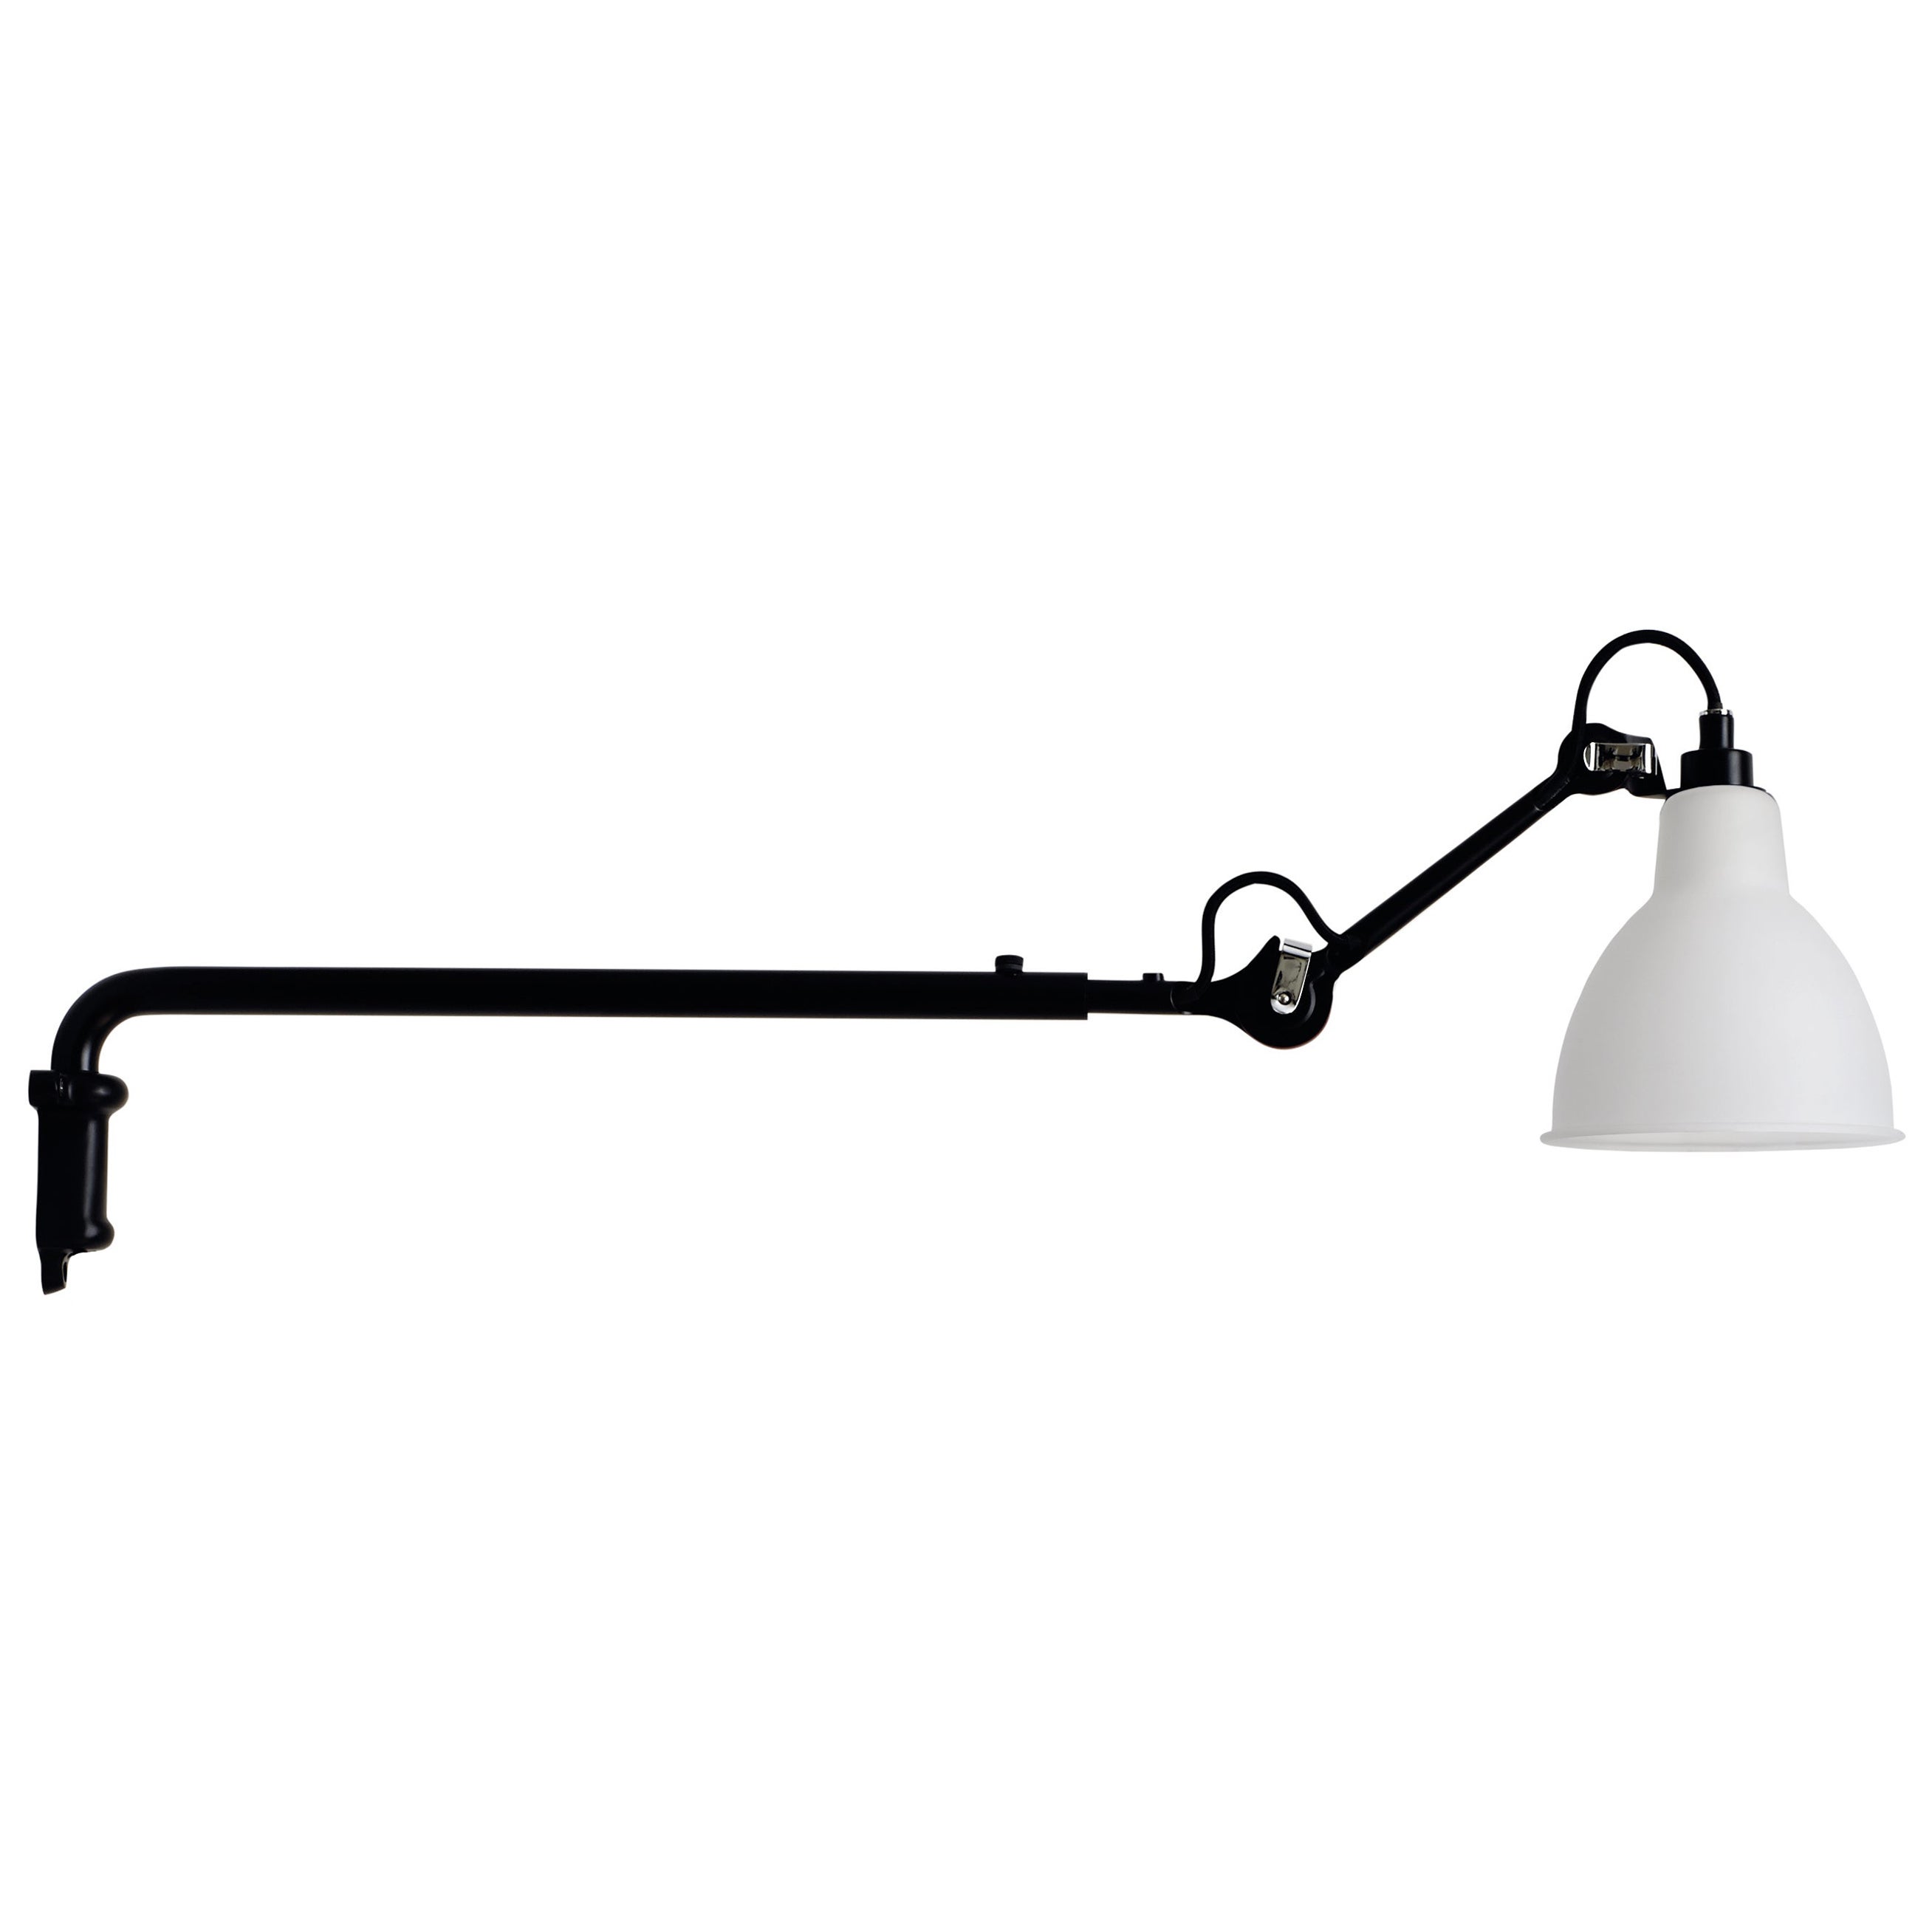 DCW Editions La Lampe Gras N°203 Wall Lamp in Black Arm & Frosted Glass Shade For Sale